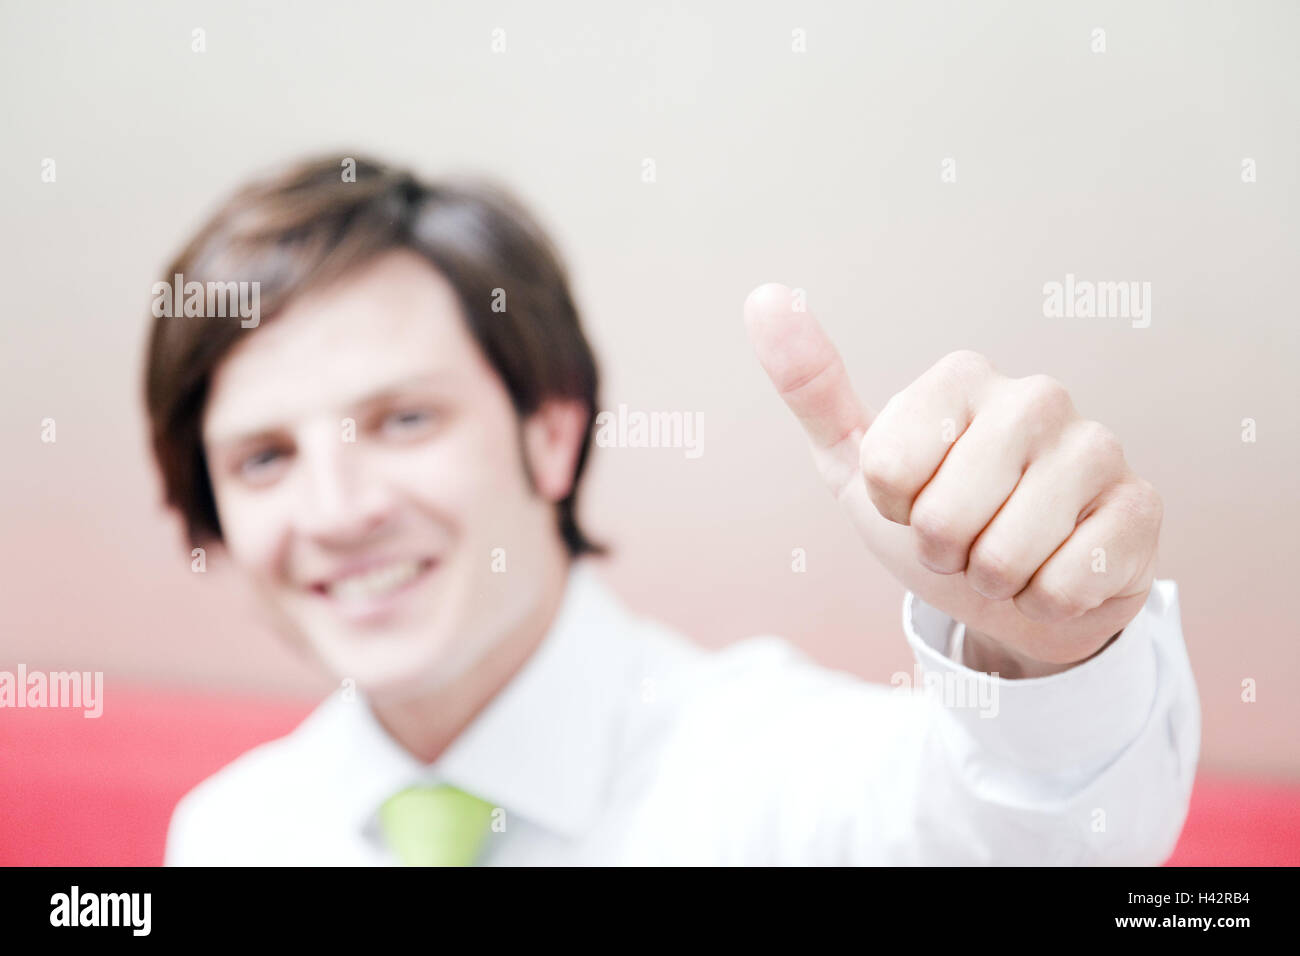 Businessman, shirt, tie, laugh, gesture, pollex high, portrait, blur, person, man, manager, business, work, occupation, occupational beginner, laxly, casually, self-confidently, self-assurance, career, success, purposefully, future, inside, satisfaction, Stock Photo